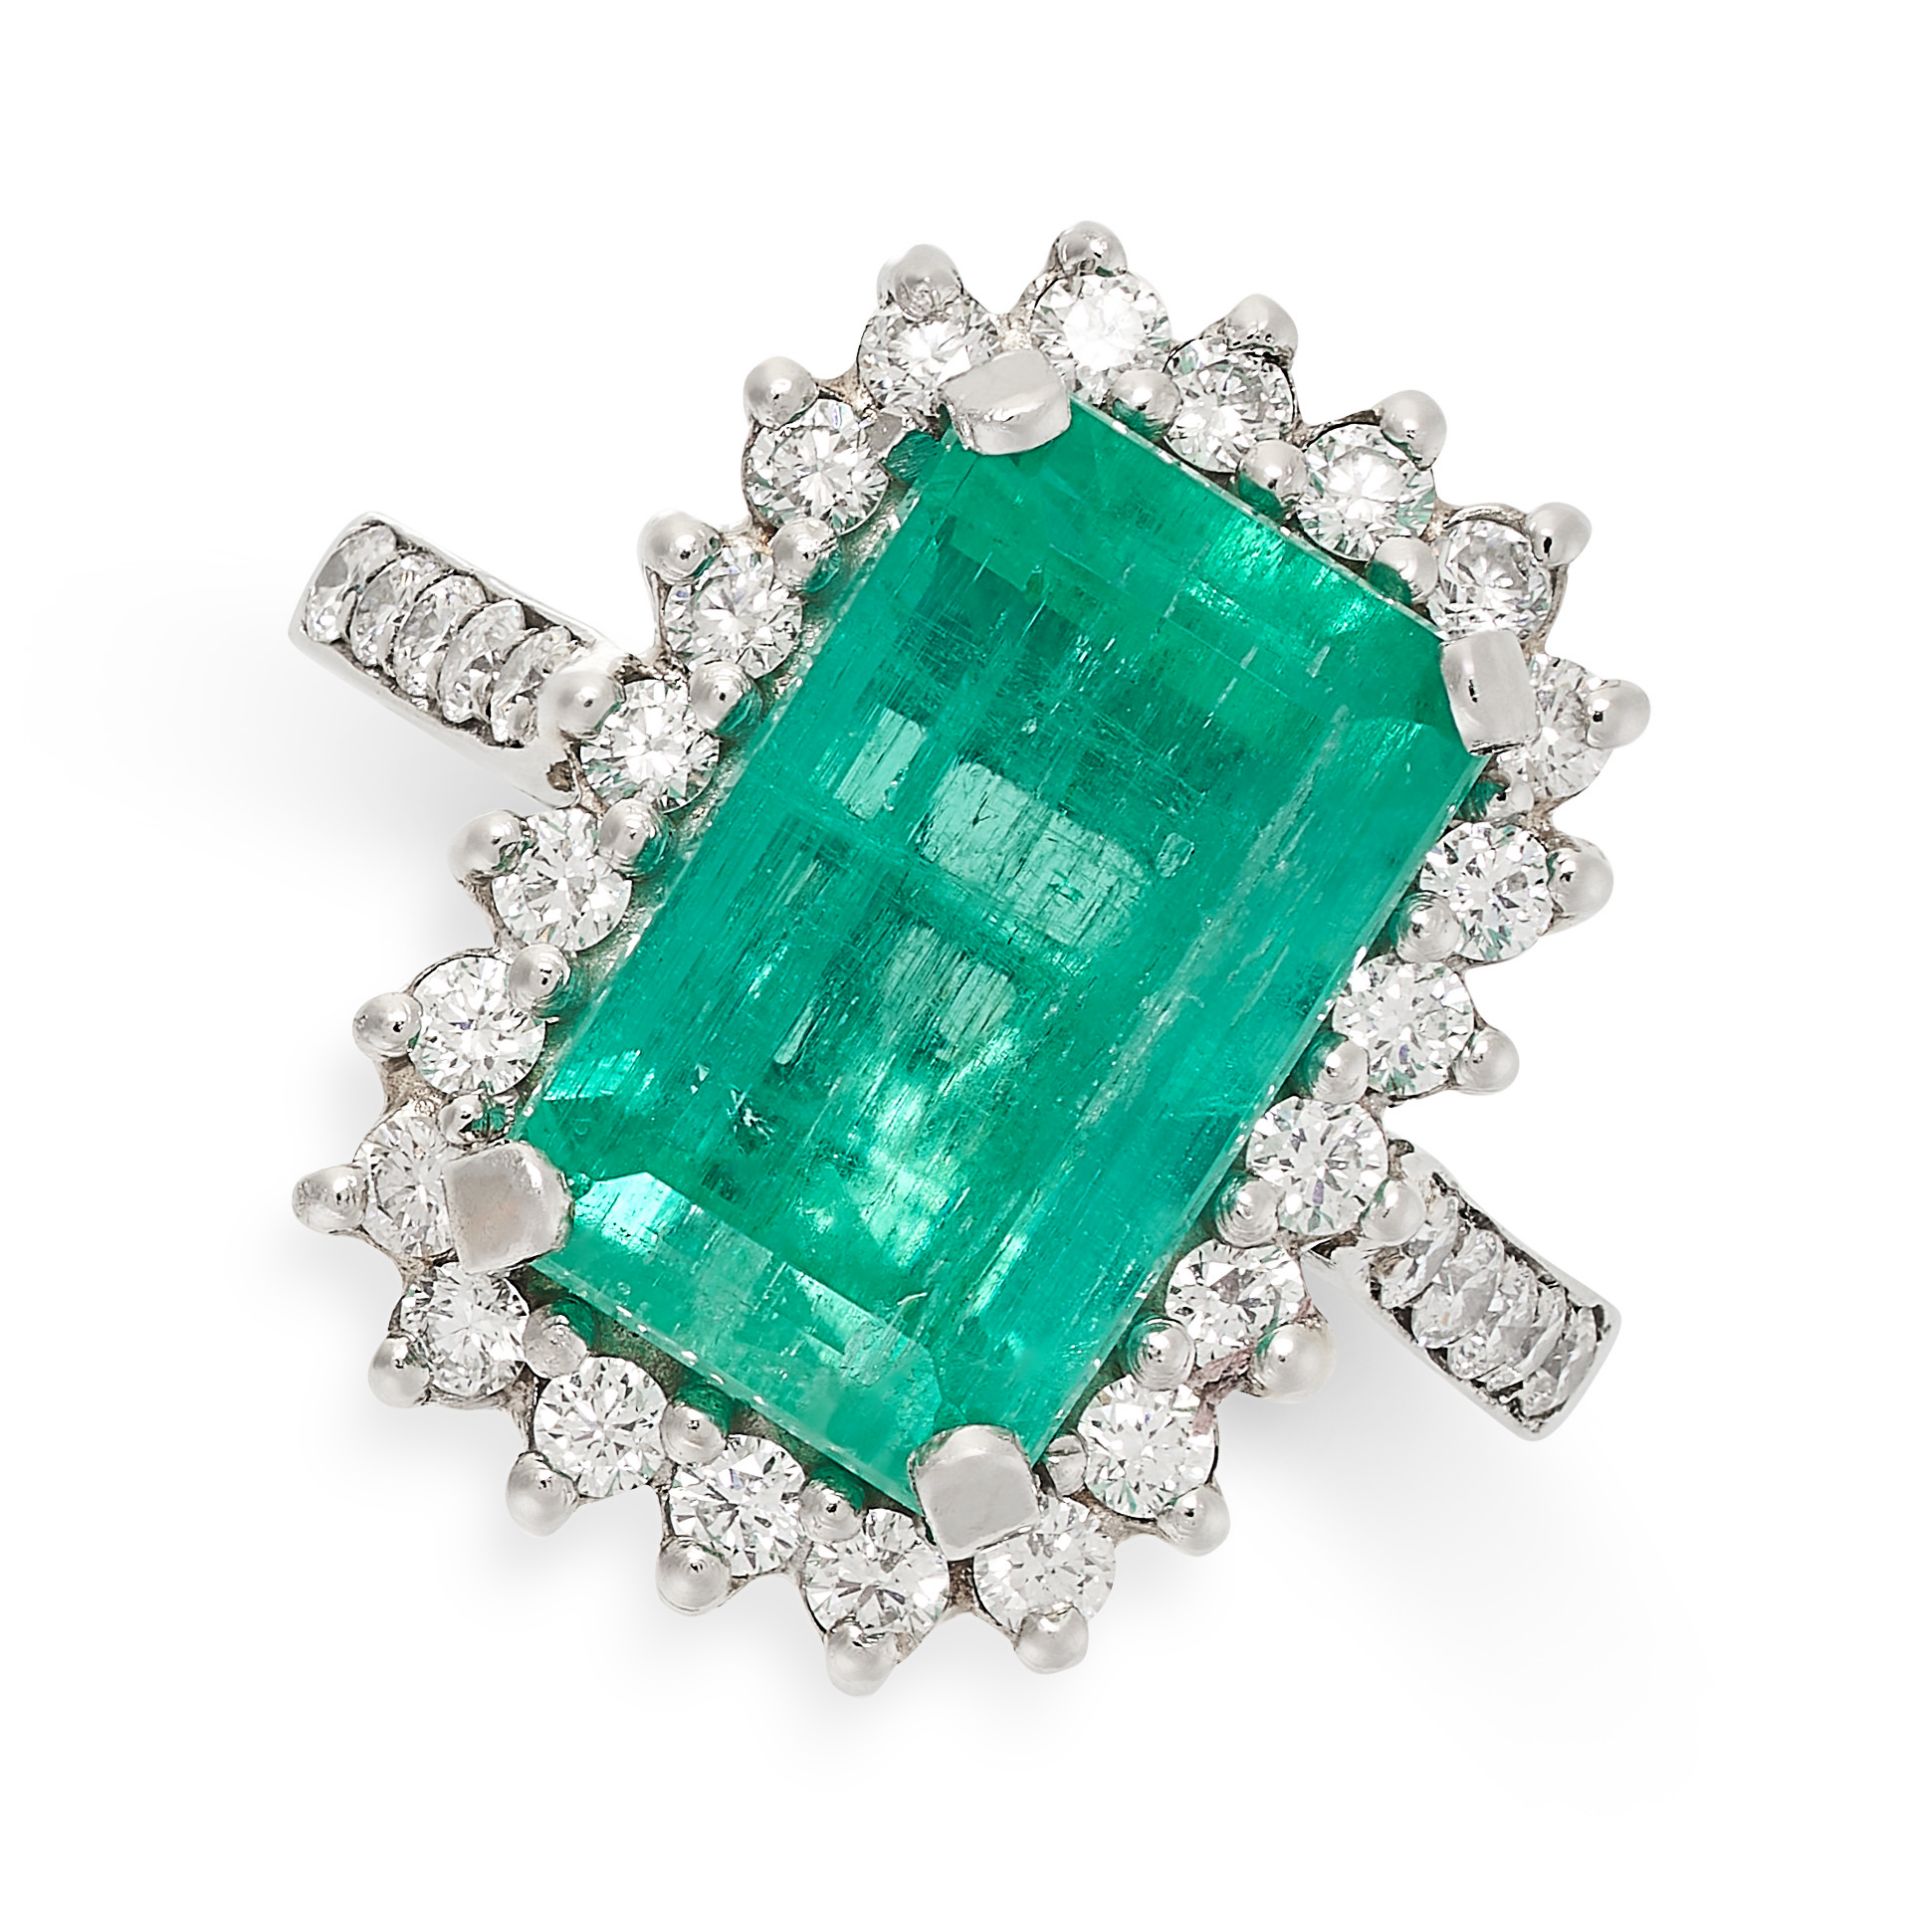 AN EMERALD AND DIAMOND CLUSTER RING in platinum, set with an octagonal cut emerald of 5.60 carats,